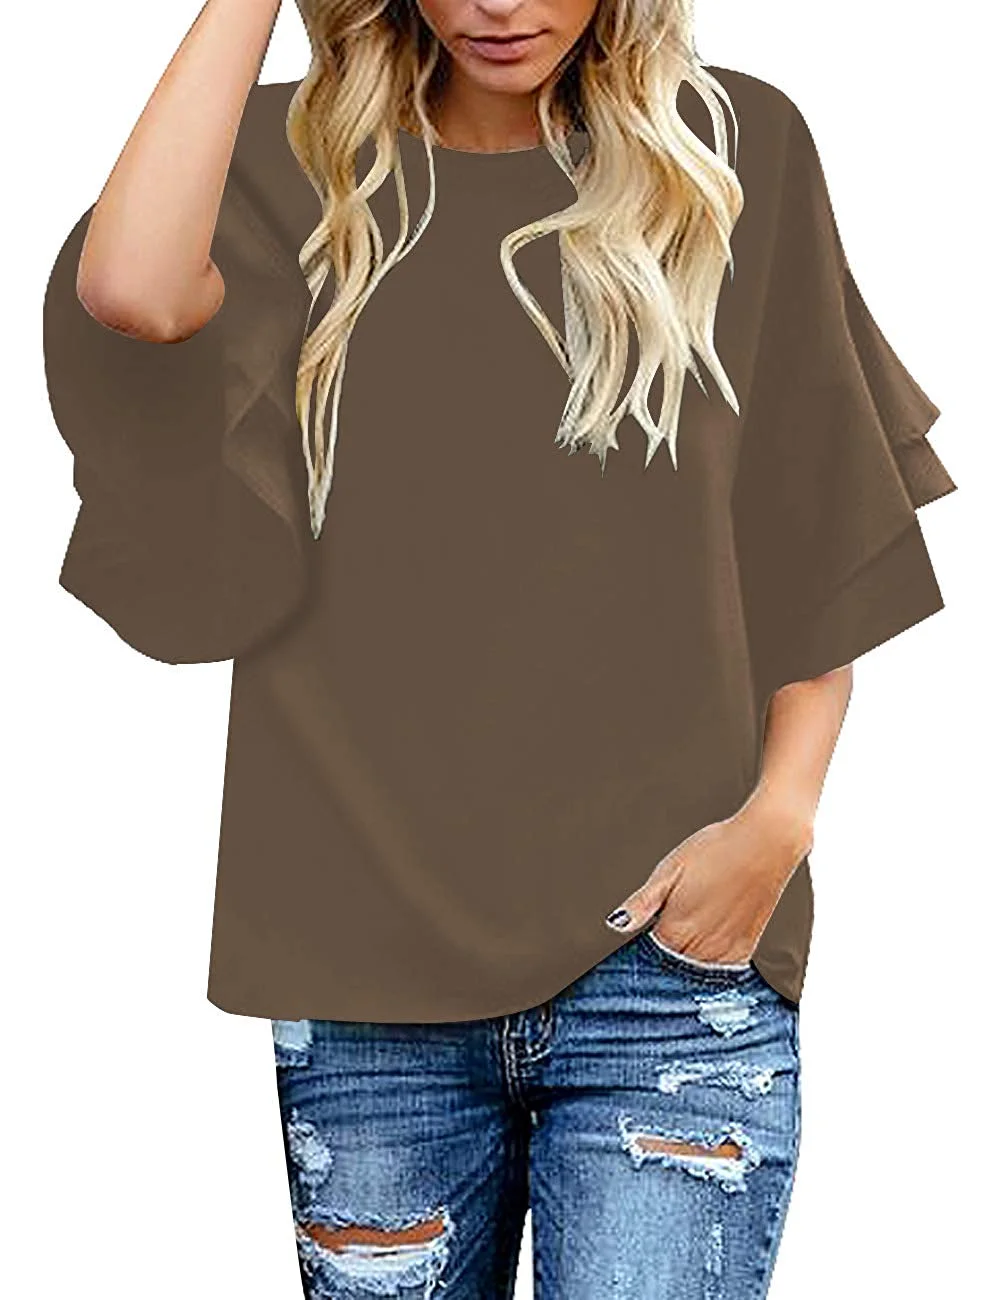 Tops Blouses Women's Casual 3/4 Tiered Bell Sleeve Crewneck Loose Tops Blouses Shirt